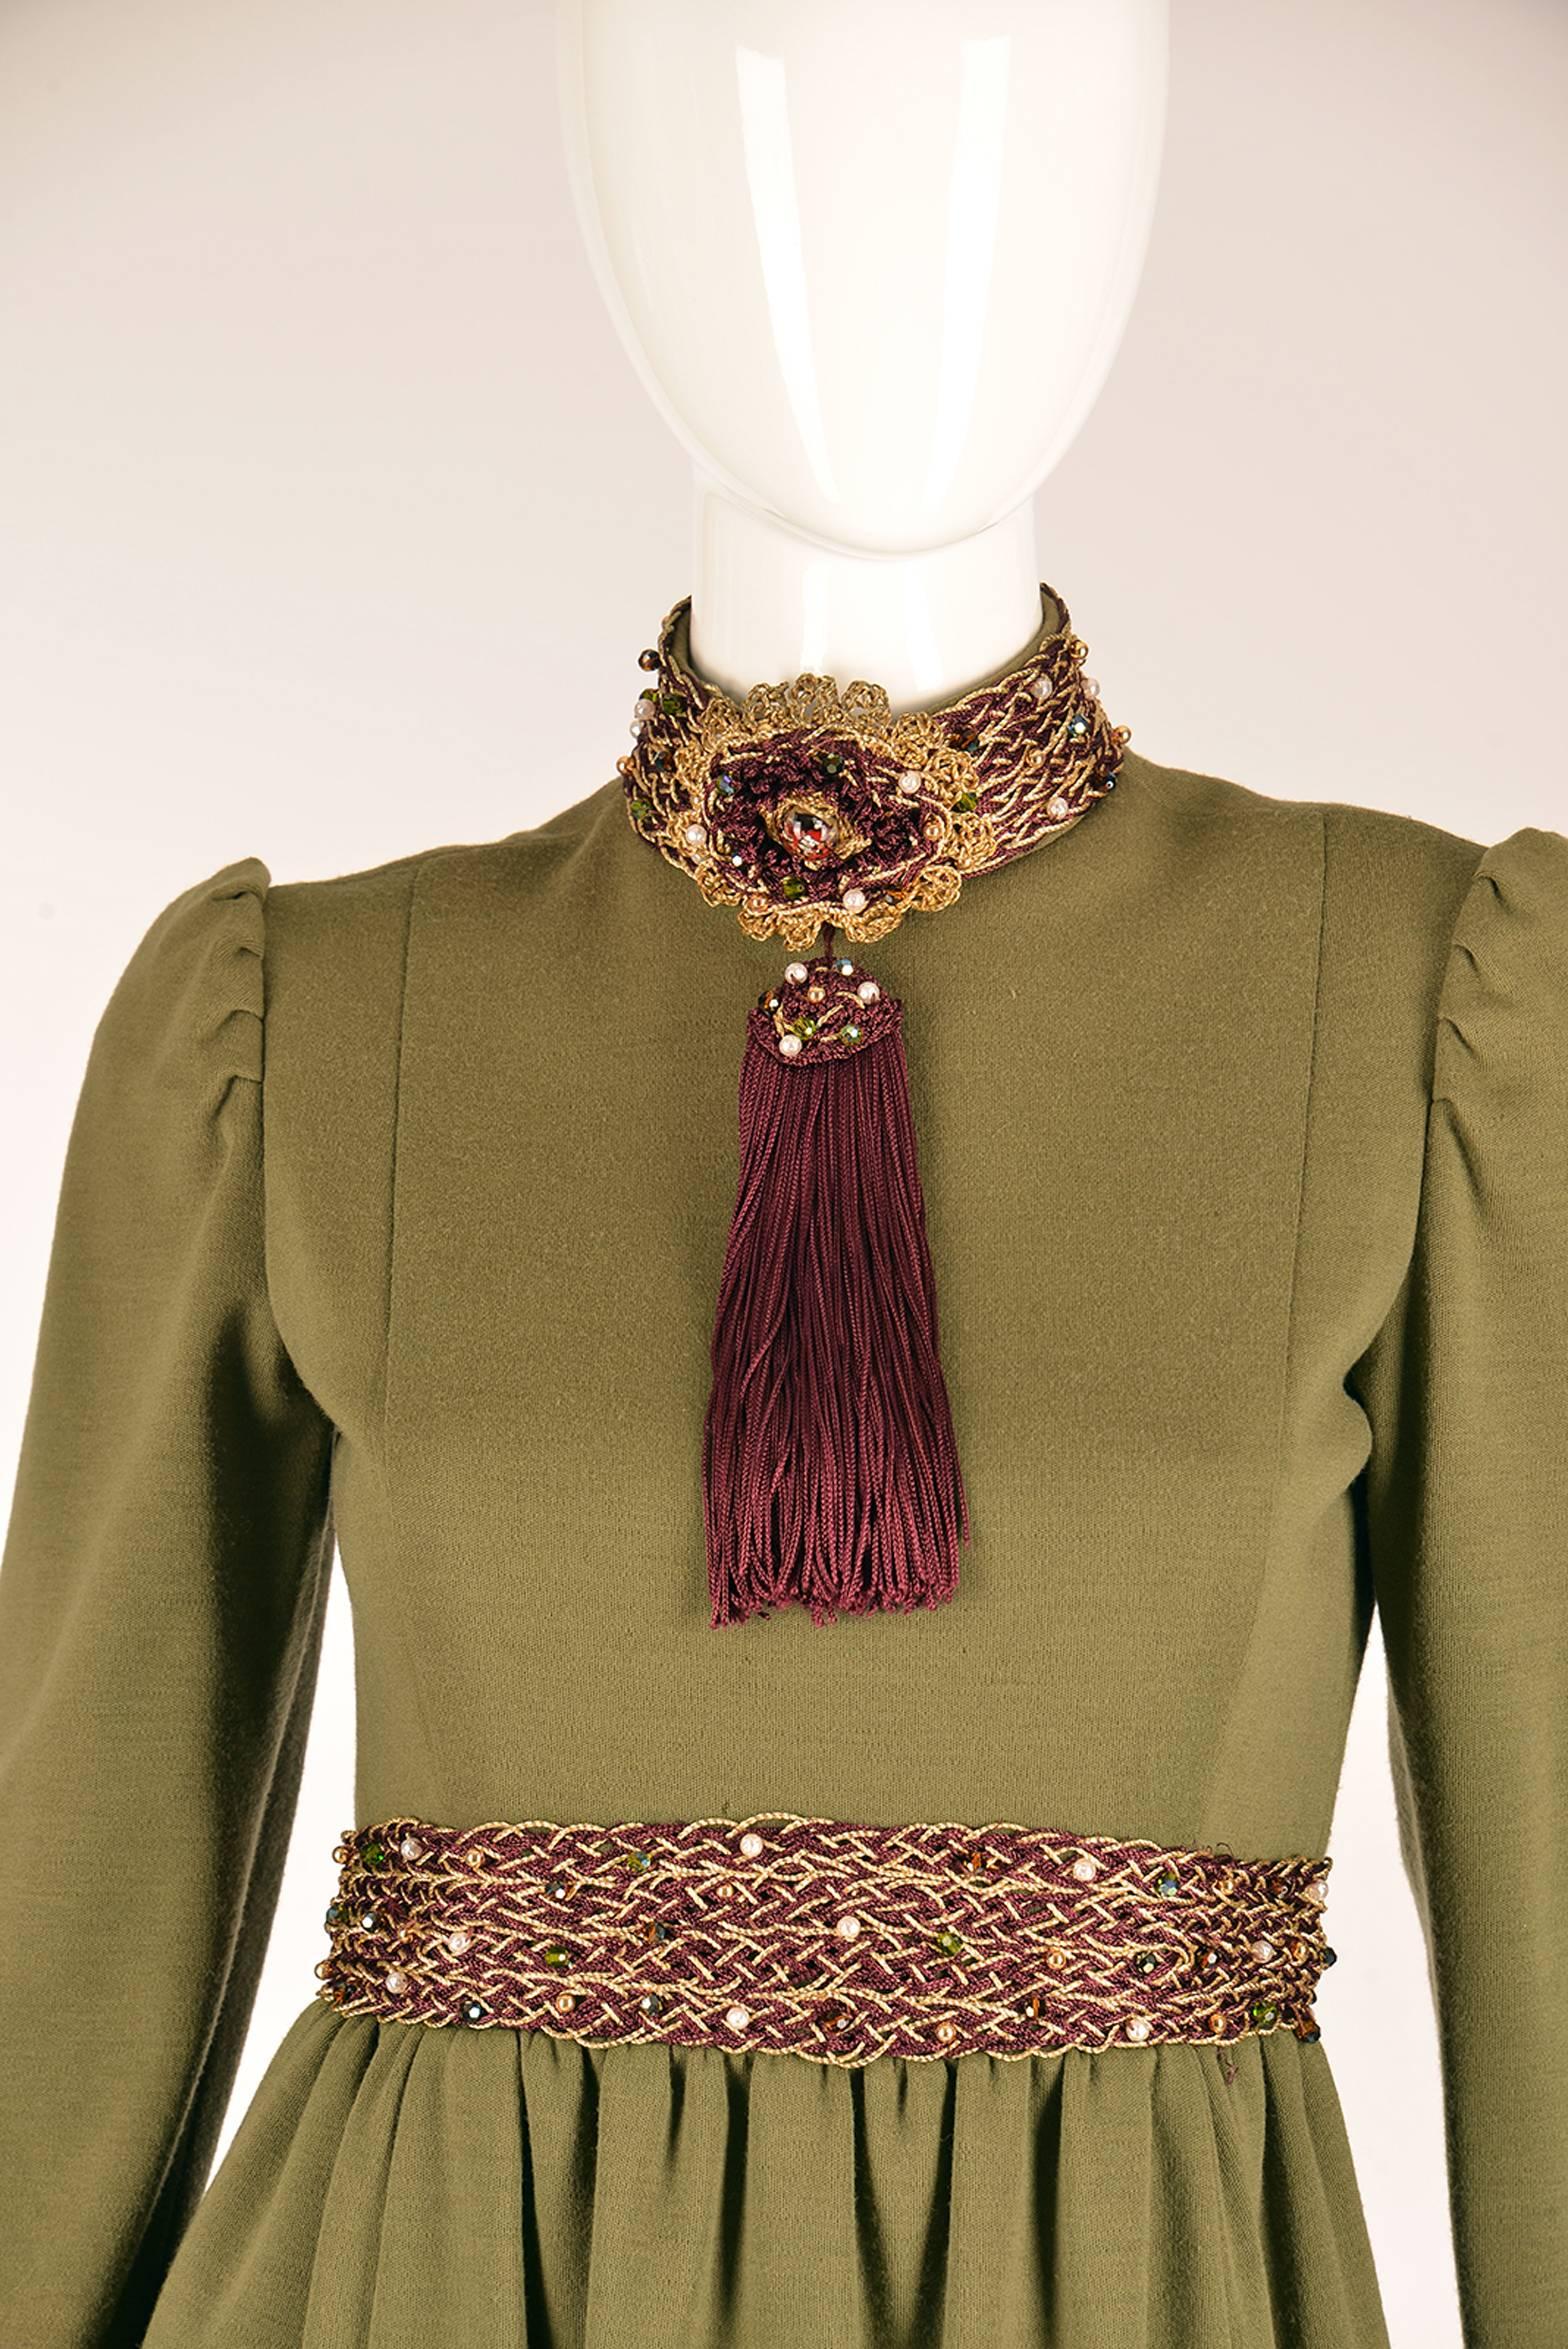 Late 1960s Geoffrey Beene olive green dress. High neck, long sleeves, and plum and gold braided thread looped together to form a chain around the neck, wrist, and waist. Three braids in total on the neck, wrist, and waist. Beading throughout the